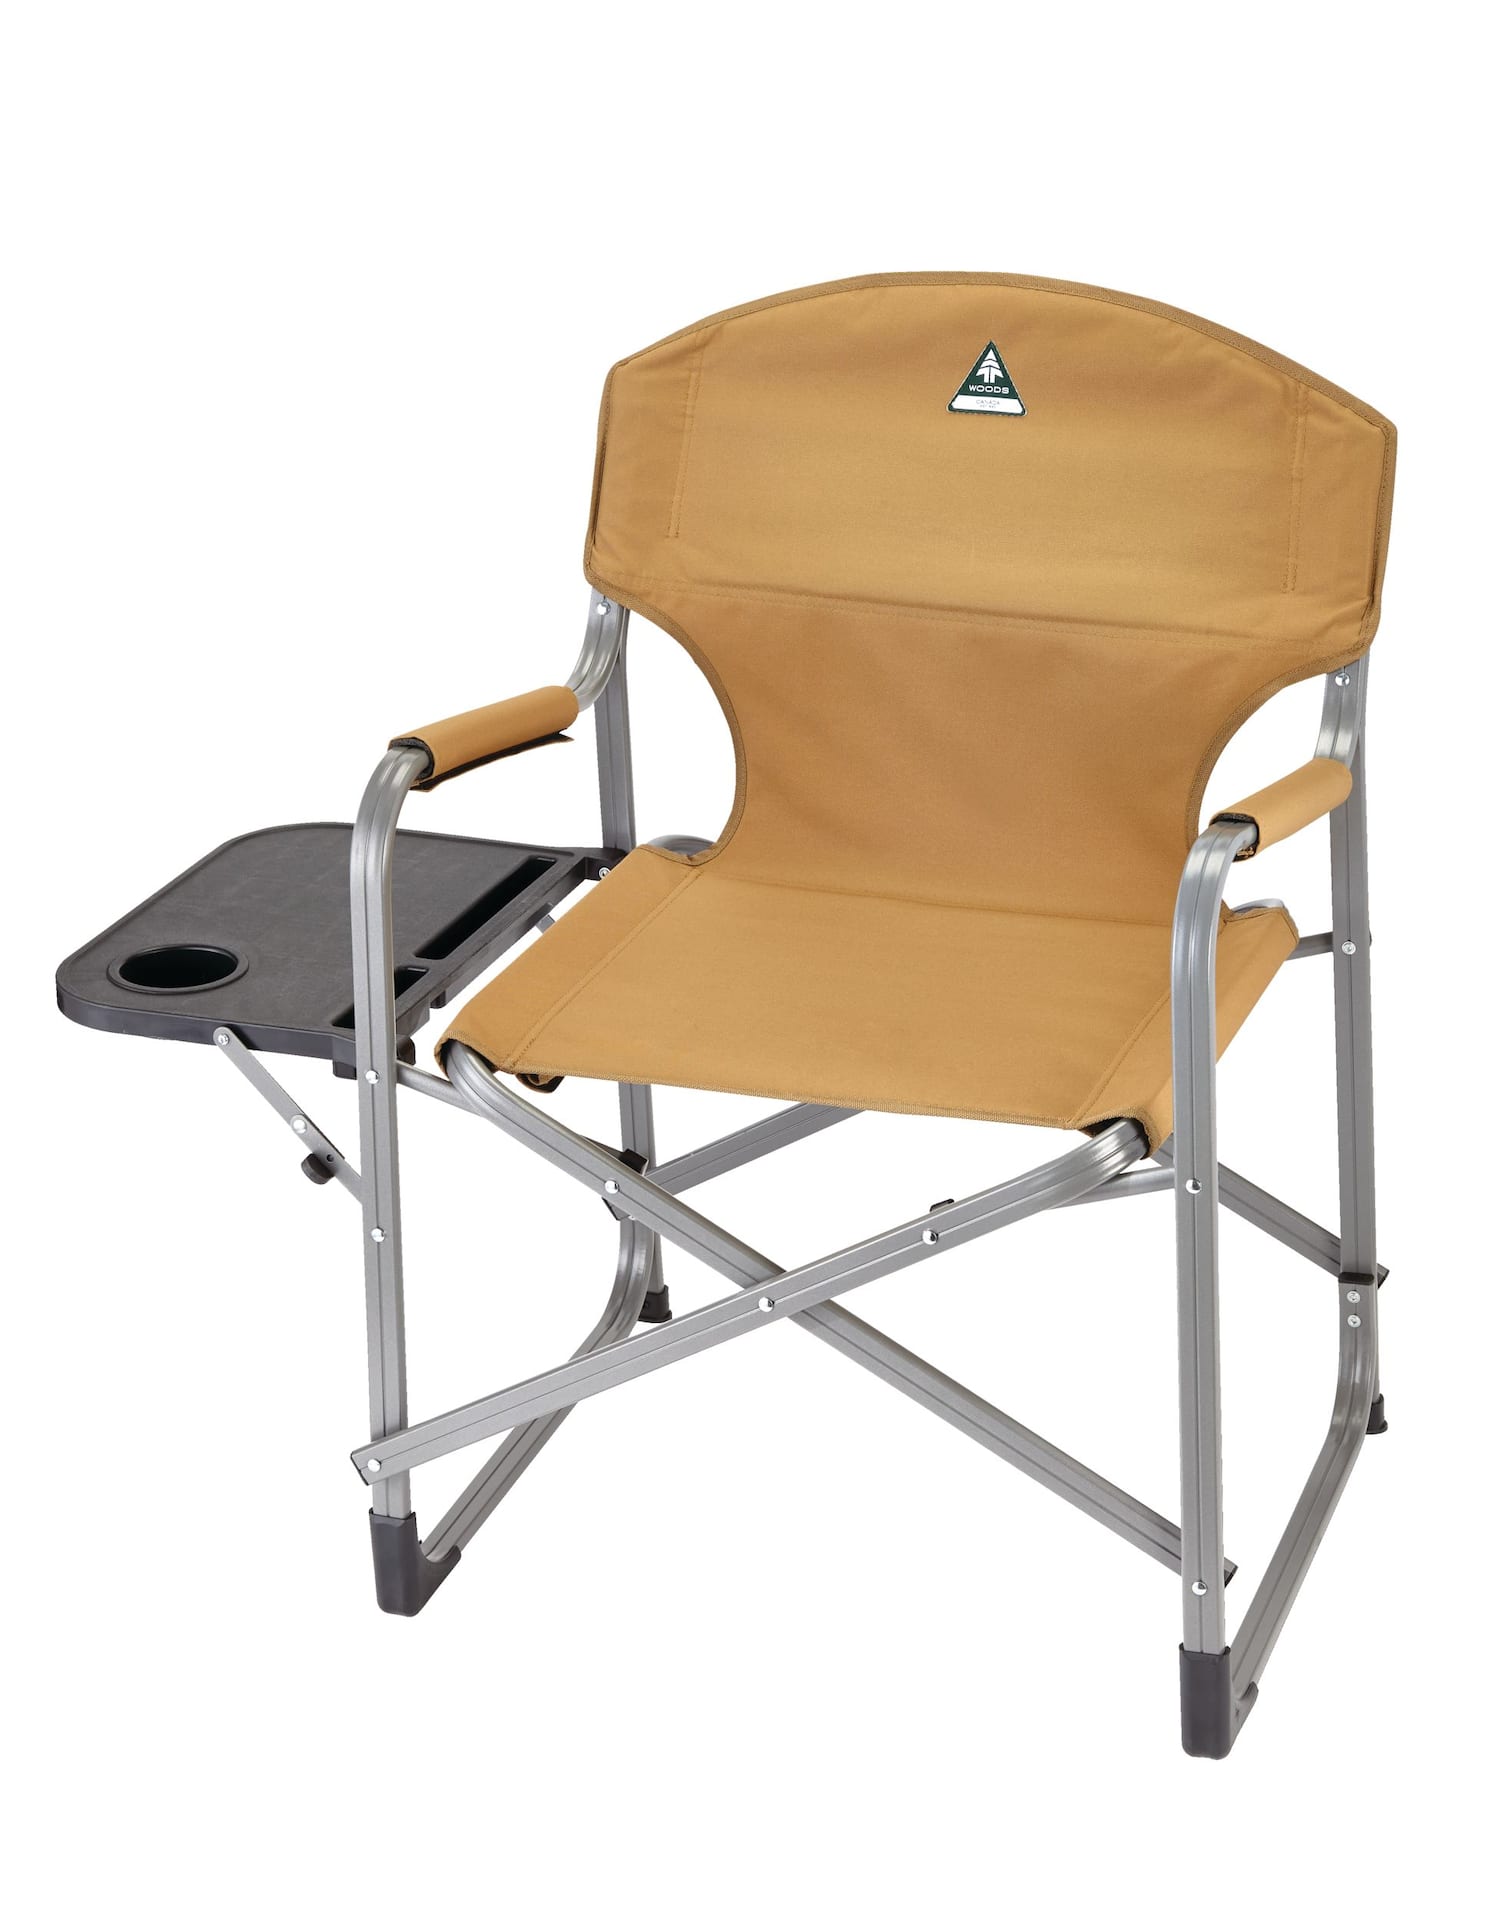 Woods Prospector Portable Folding Camping Chair w/ Side Table